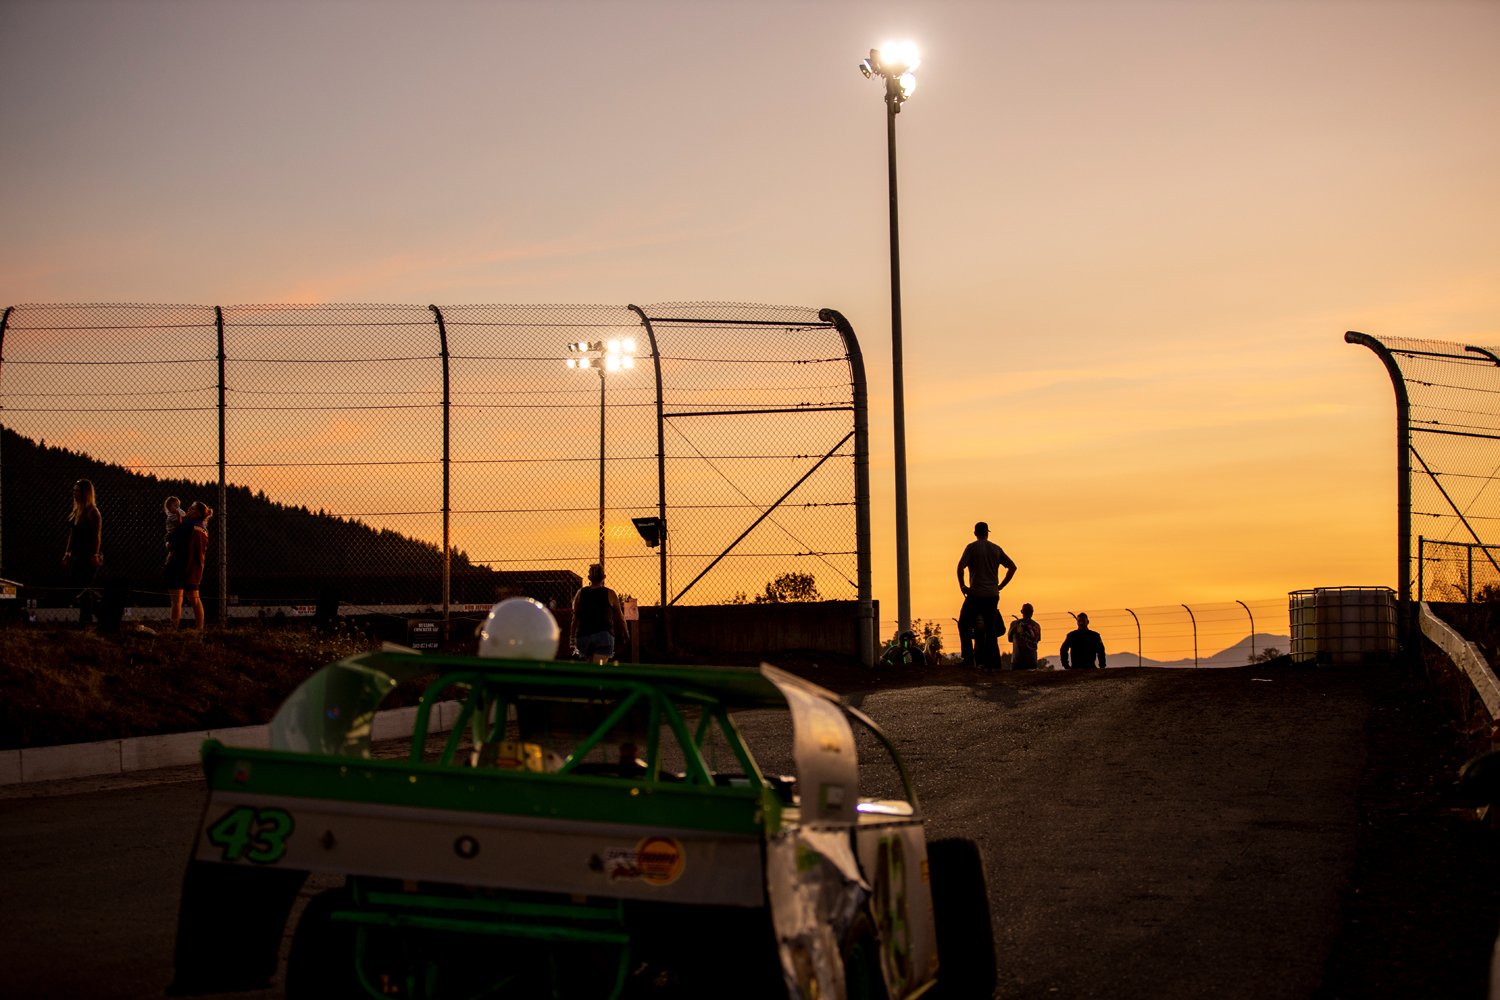  The sun sets over Willamette Speedway Saturday in Lebanon, Ore. as the crowd waits for the next race to start. The ⅓ mile dirt track hosts a wide variety of races, from tiny wingless sprint karts to street stock cars. 